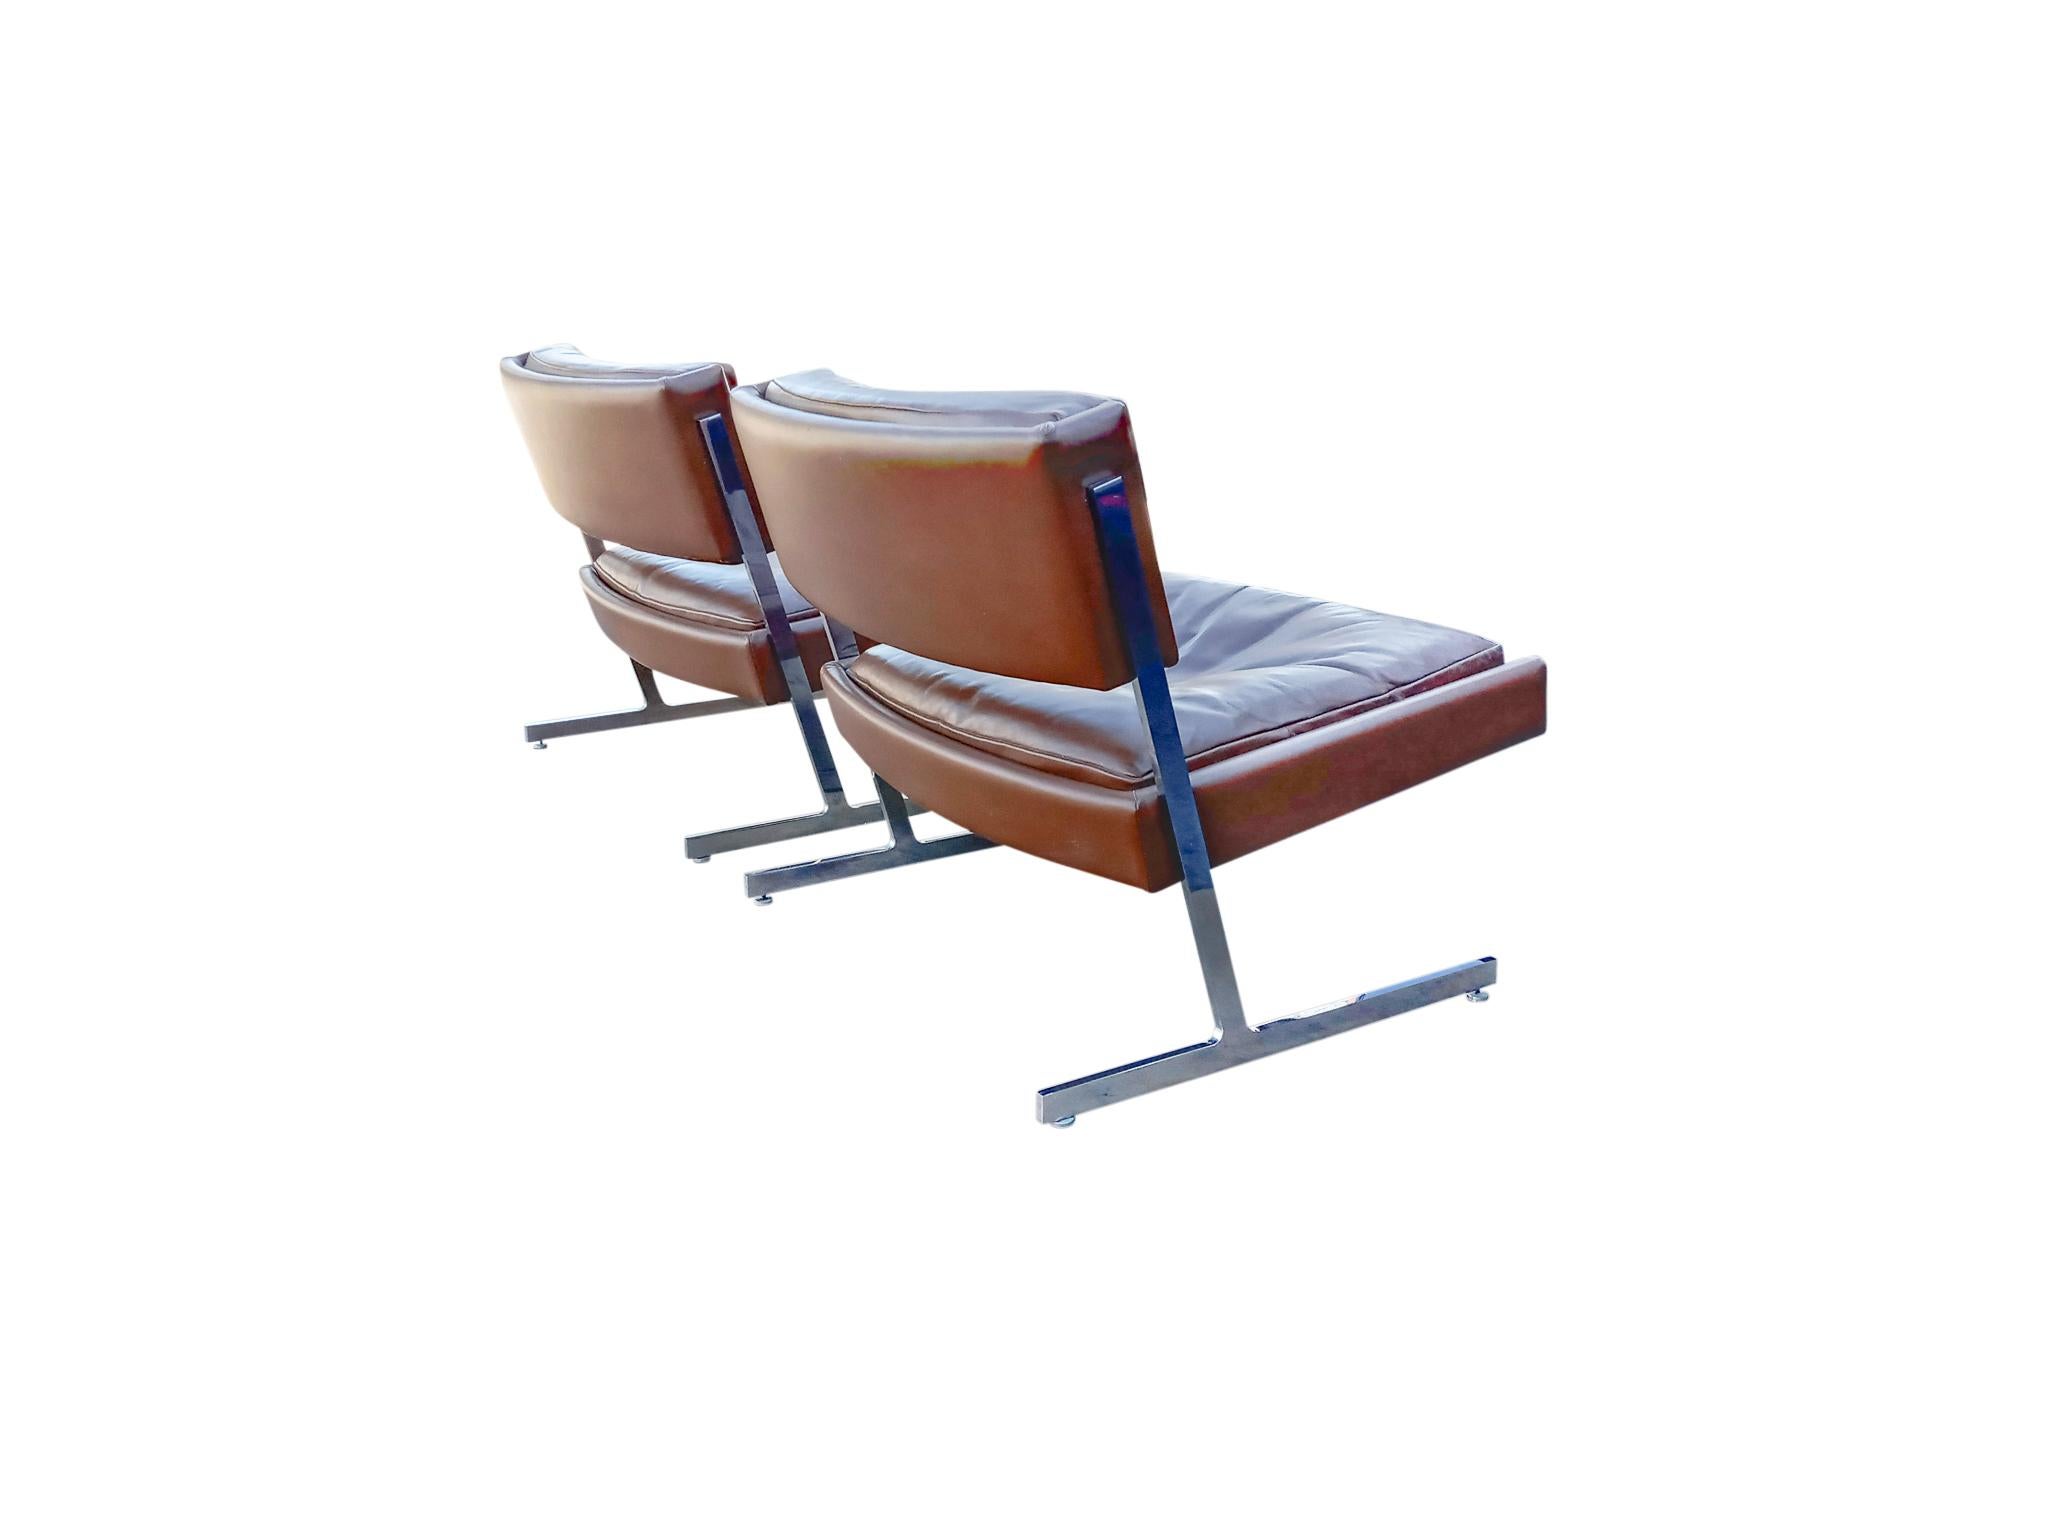 Mid-20th Century Harvey Probber Pair of Leather & Chrome Slipper Lounge Chairs Cantilevered Seats For Sale